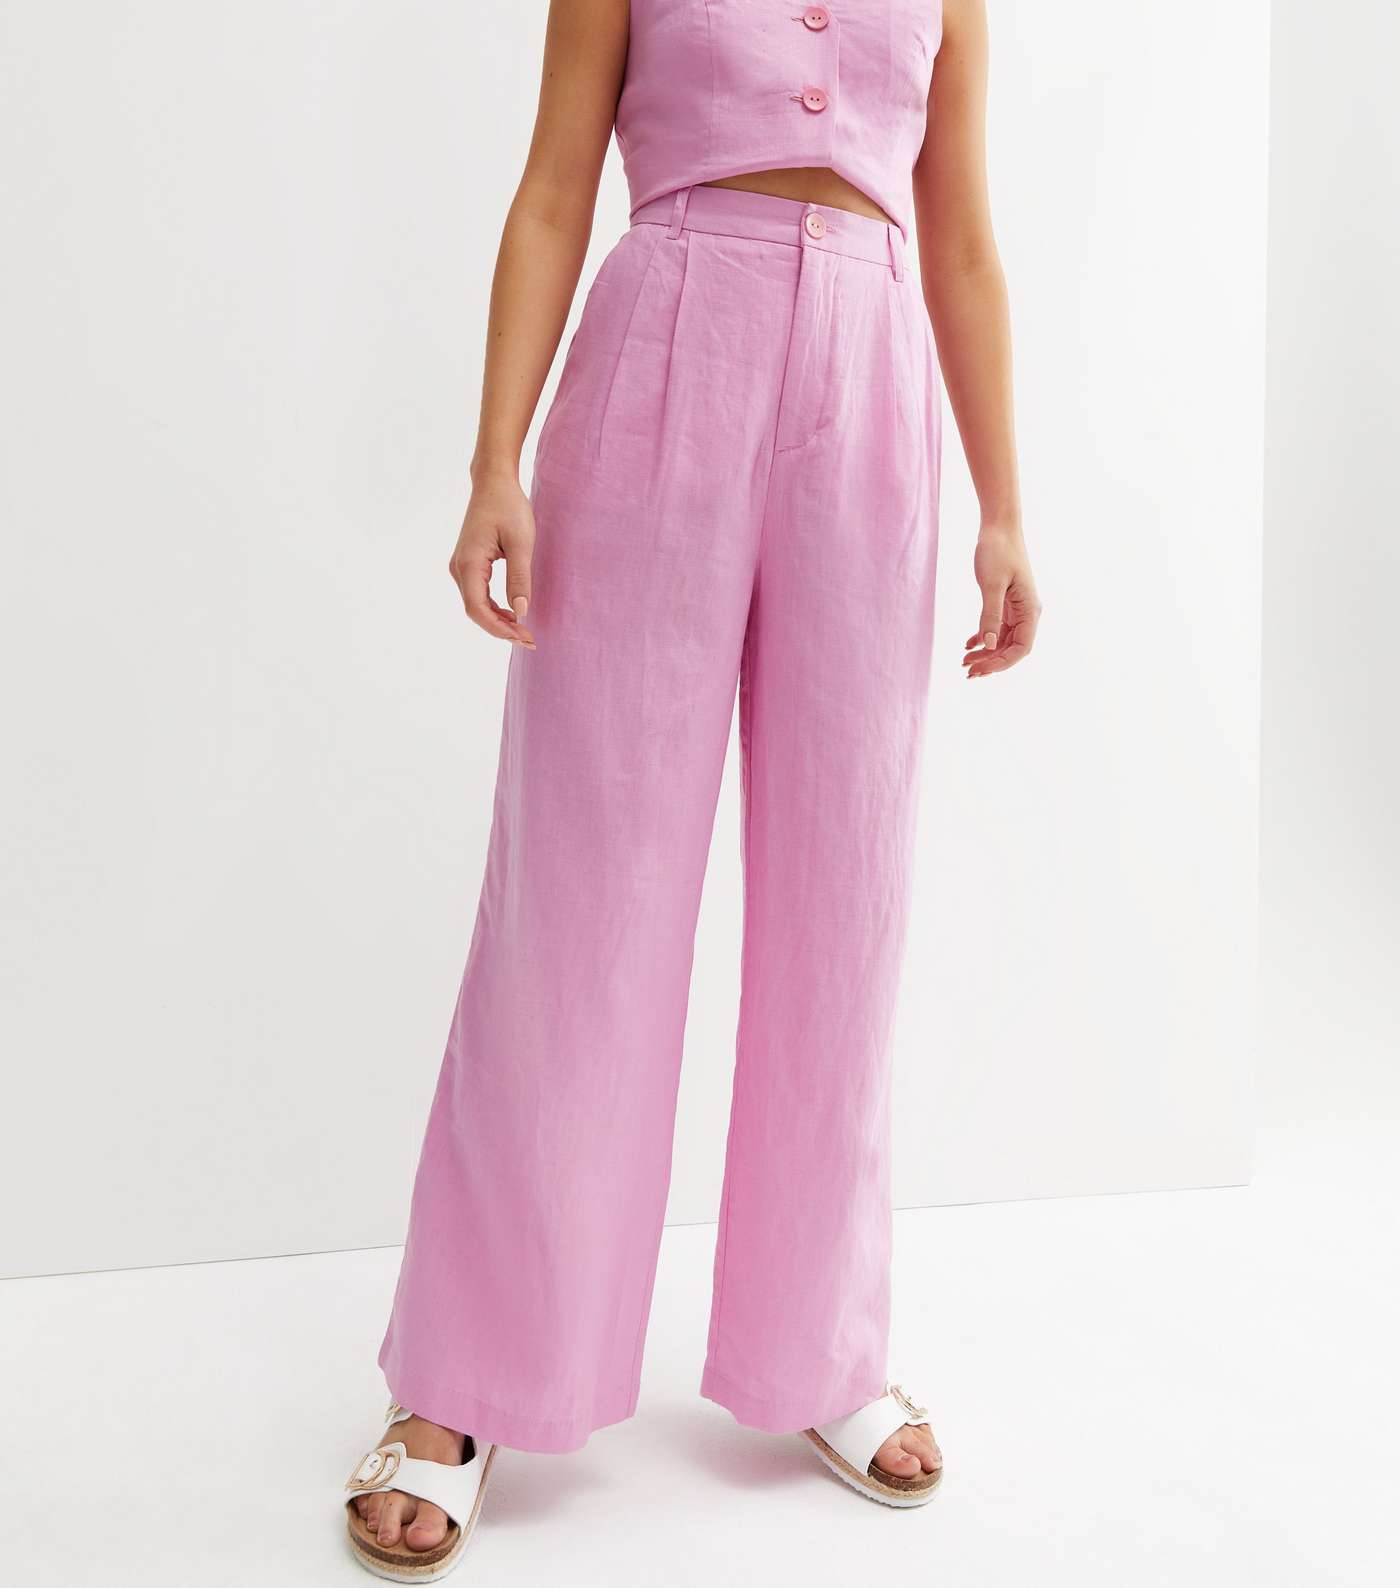 Bright Pink Linen Look Wide Leg Trousers Image 2